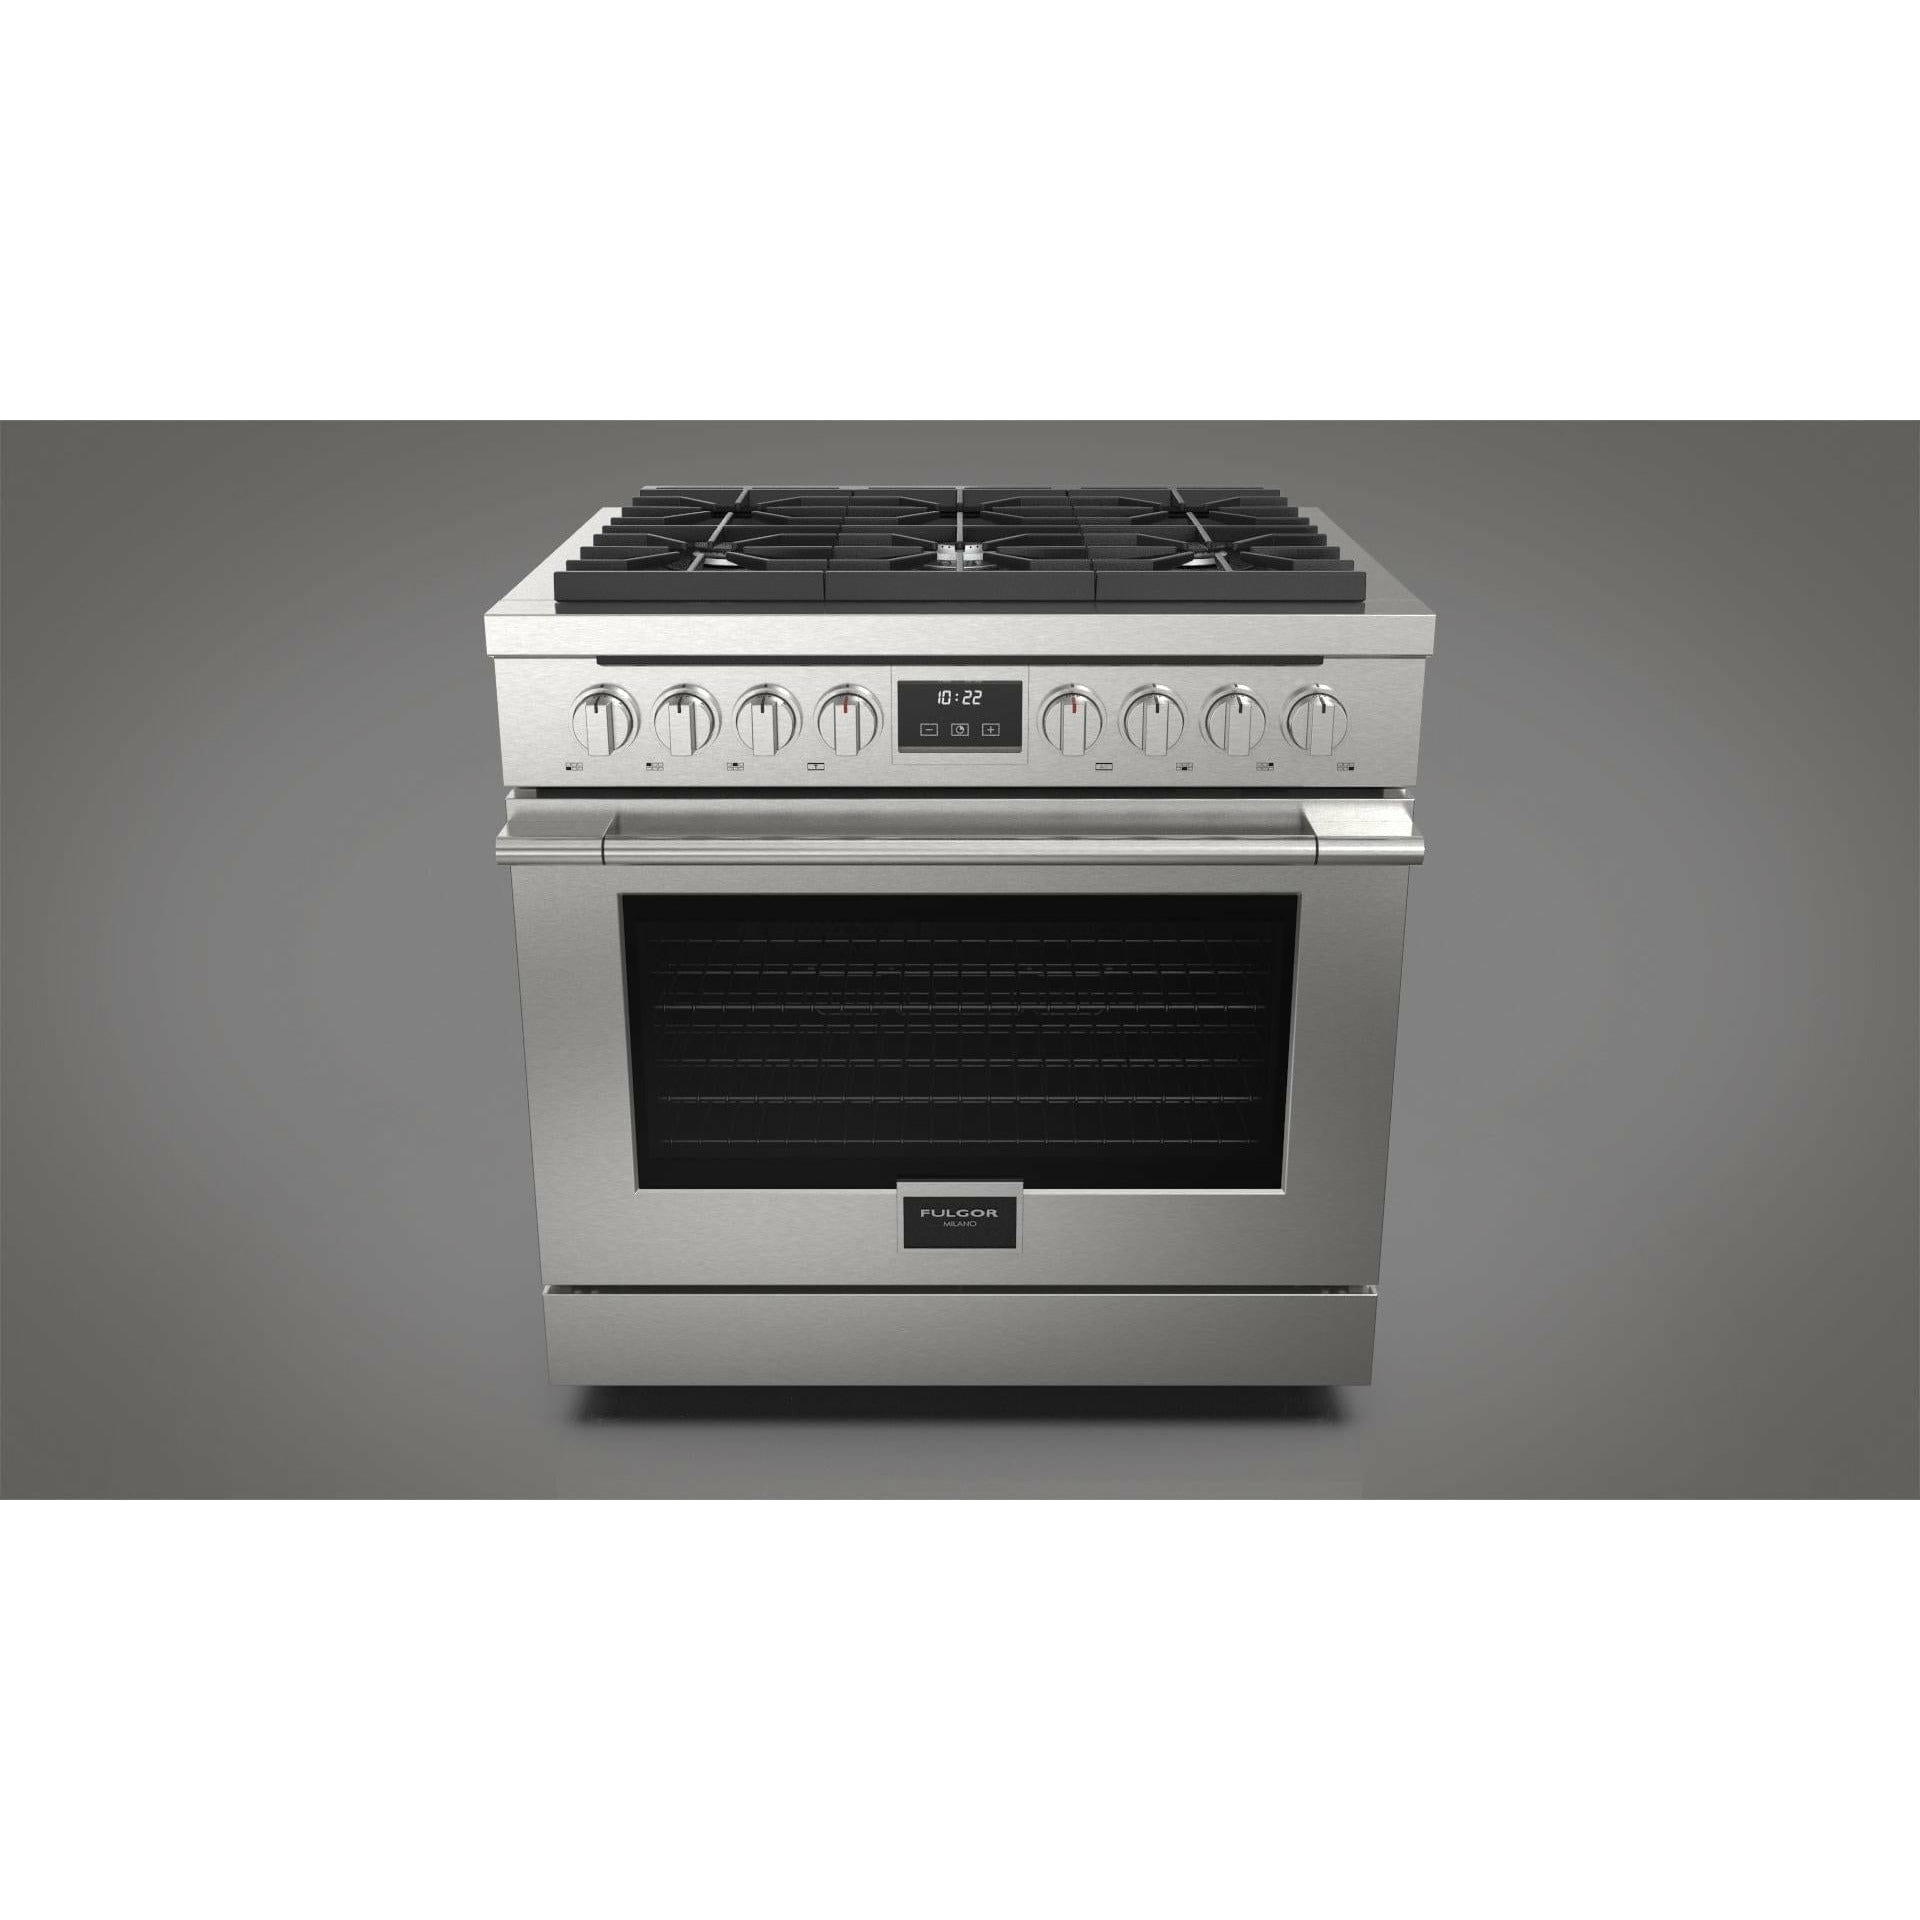 Fulgor Milano 36" Freestanding All Gas Range with 3 Duel Flame Burners, Stainless Steel - F4PGR366S2 Ranges F4PGR366S2 Luxury Appliances Direct